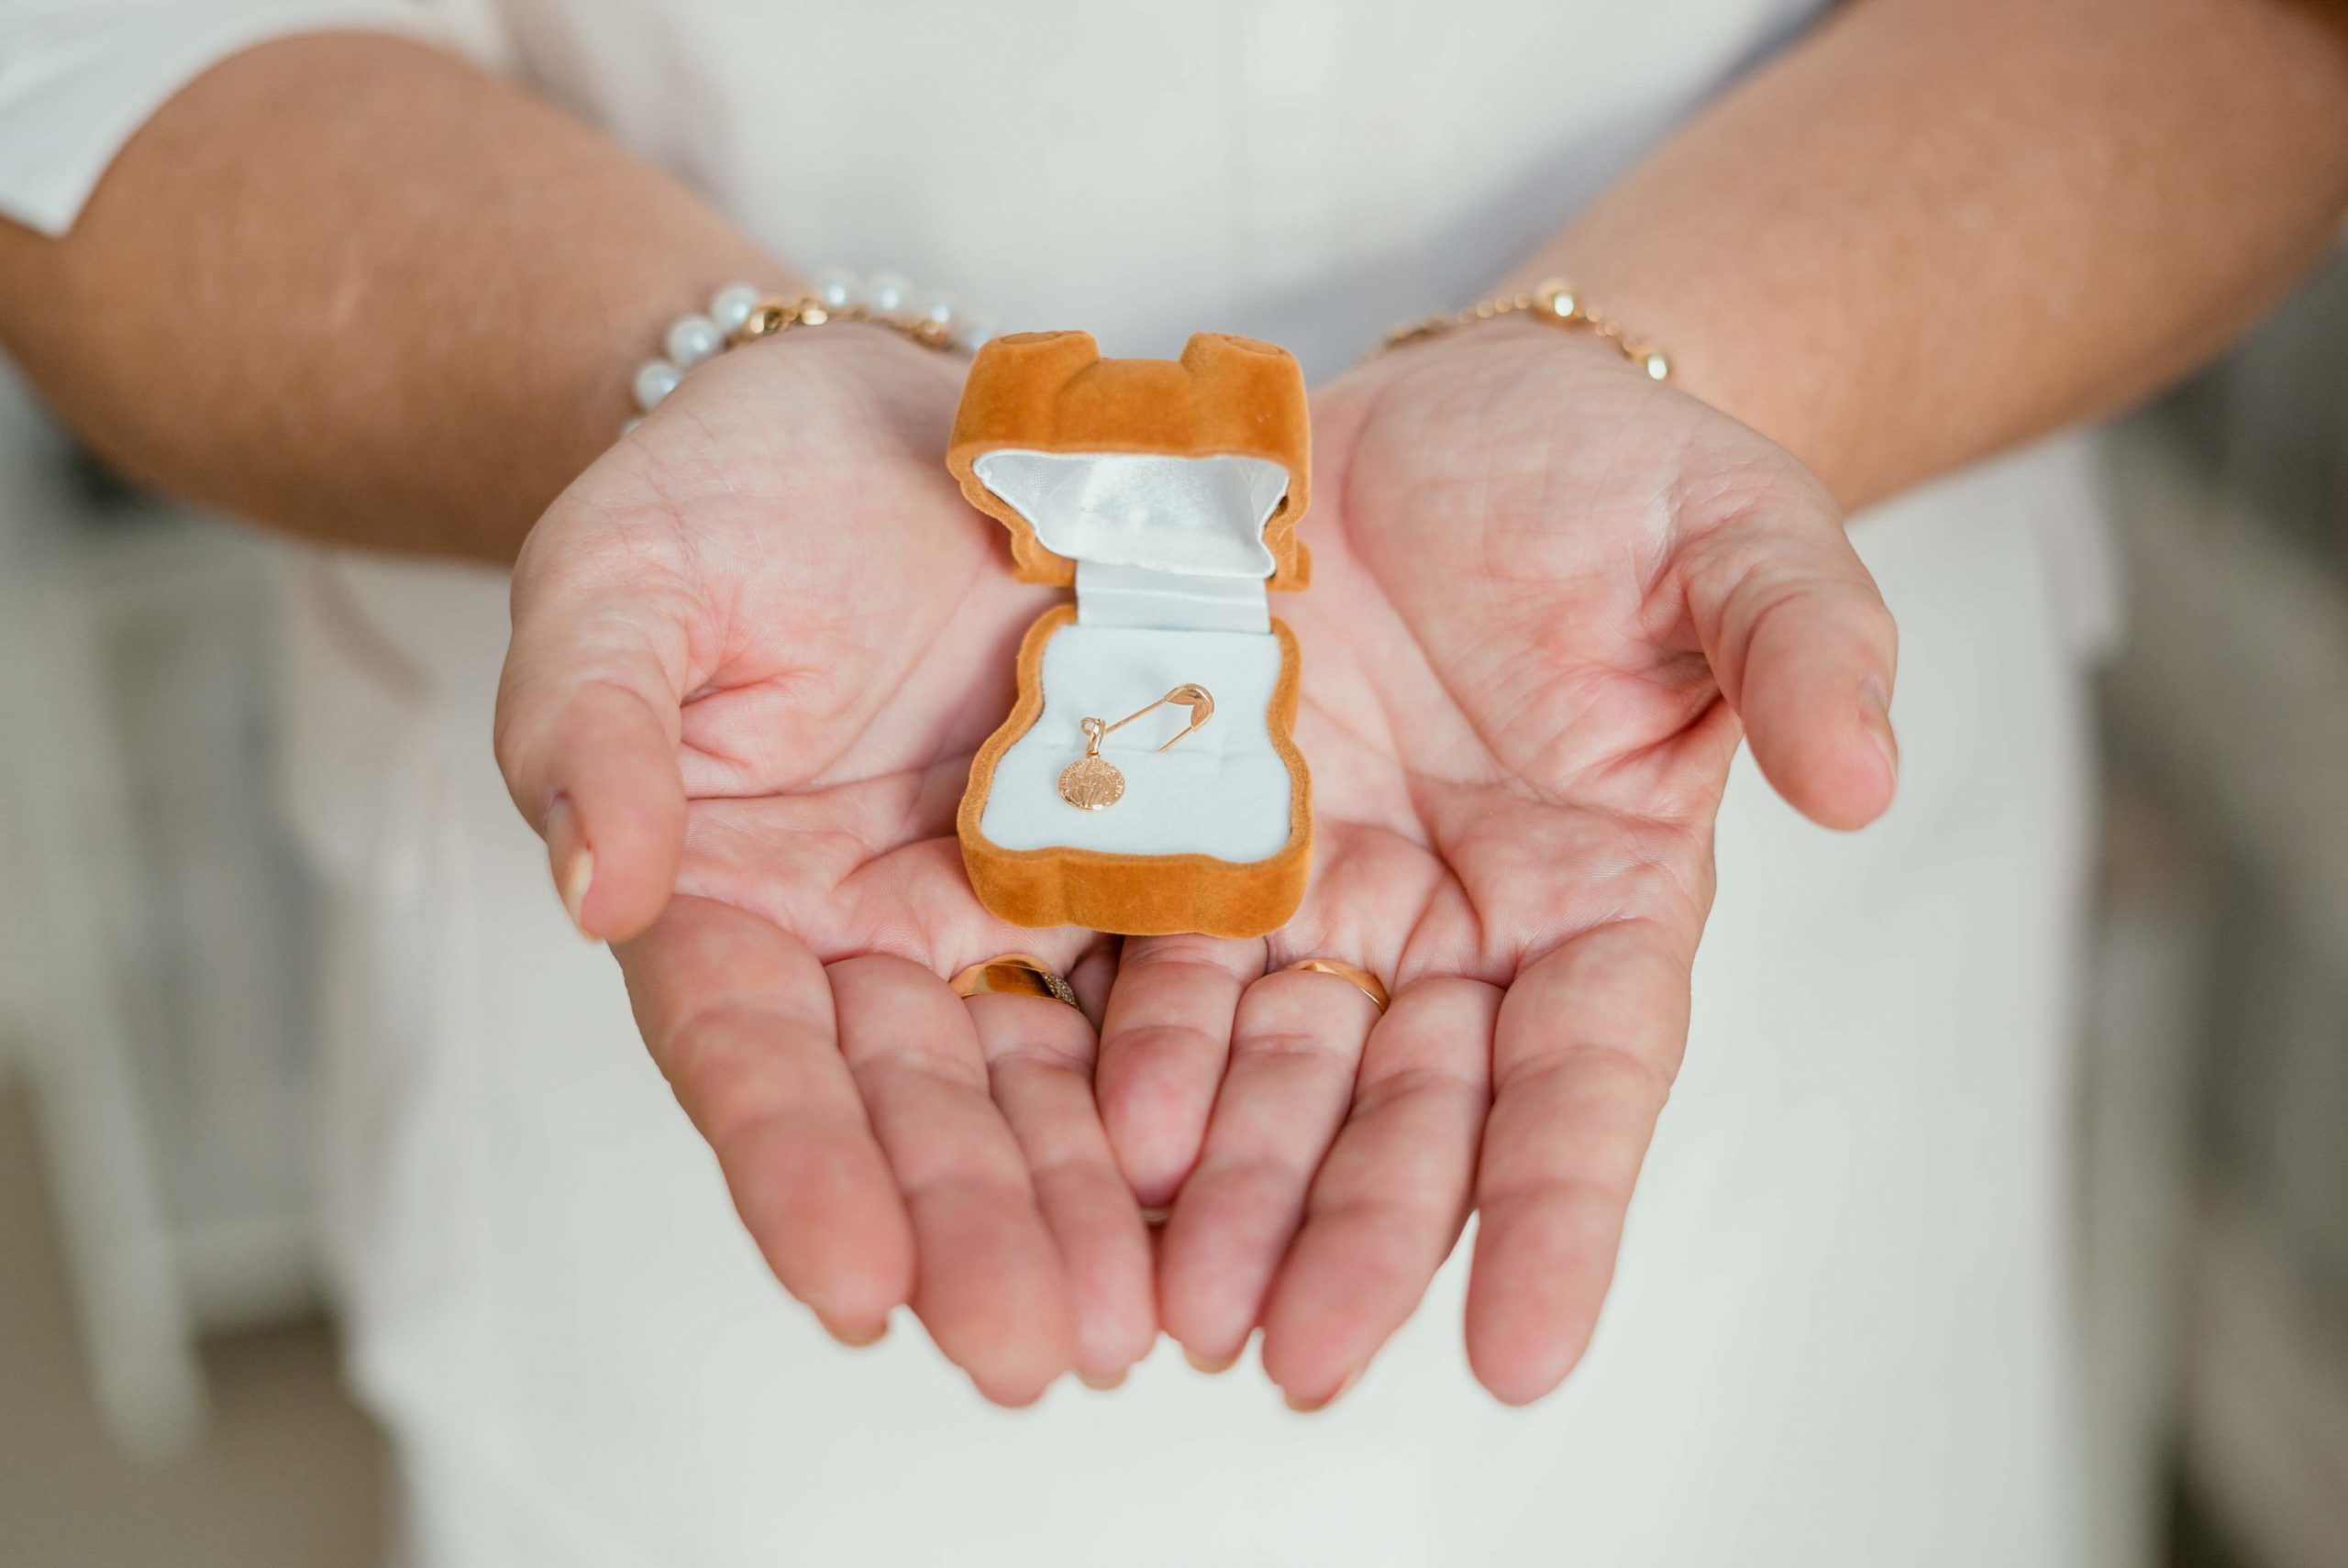 newborn films and photos: close up of grandma with baby's jewellery in her hands